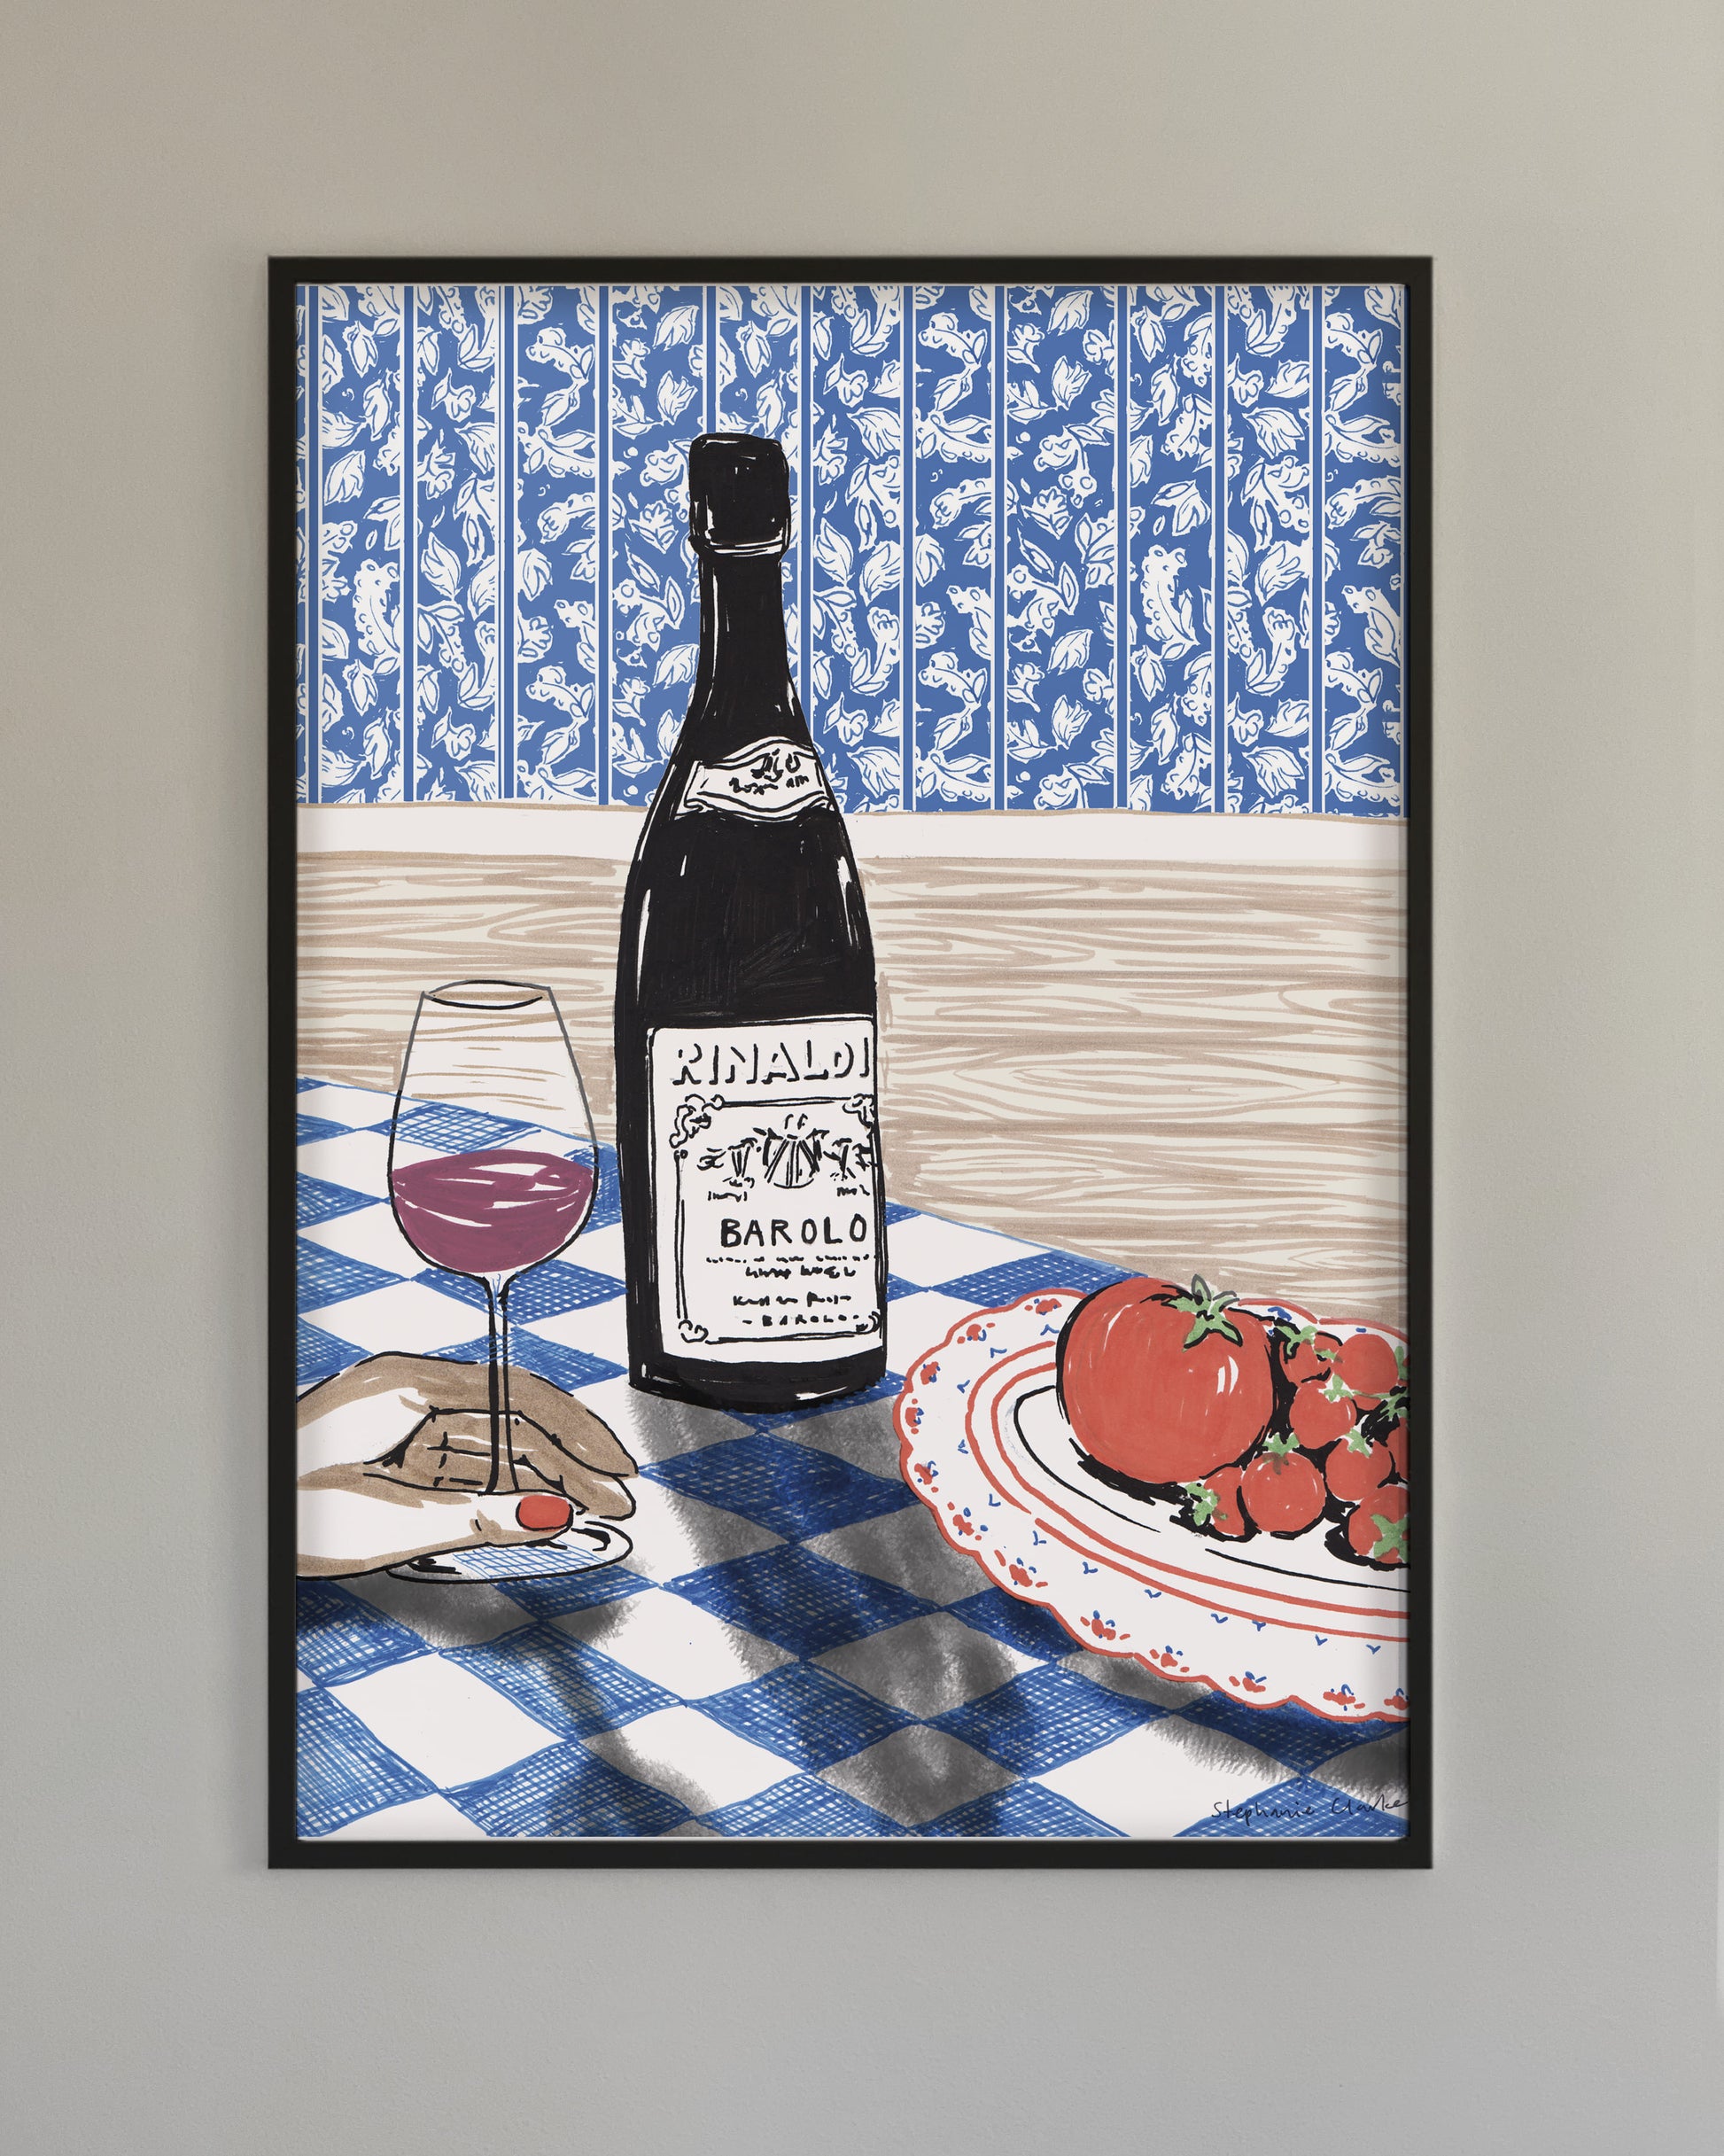 Exclusive wine art posters created by artists in collaboration with Brushery. Premium quality wine art prints printed on environmentally friendly FSC marked paper.